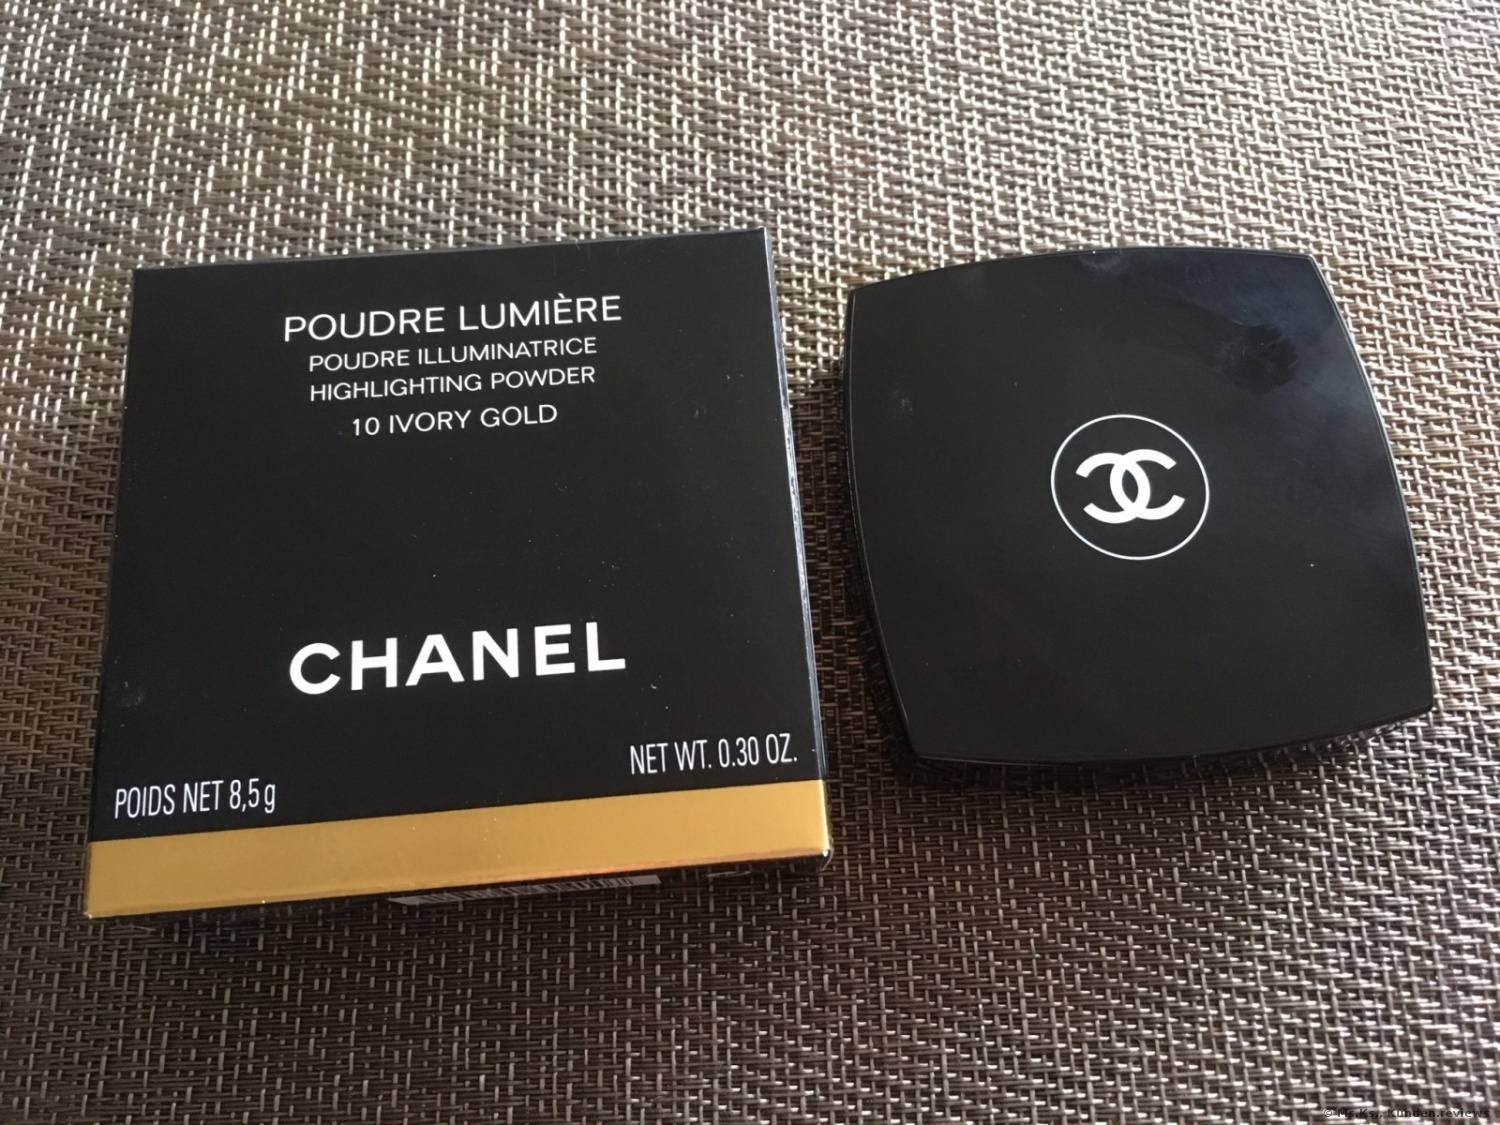  Chanel Poudre Lumiere Highlighter # 10 Ivory Gold